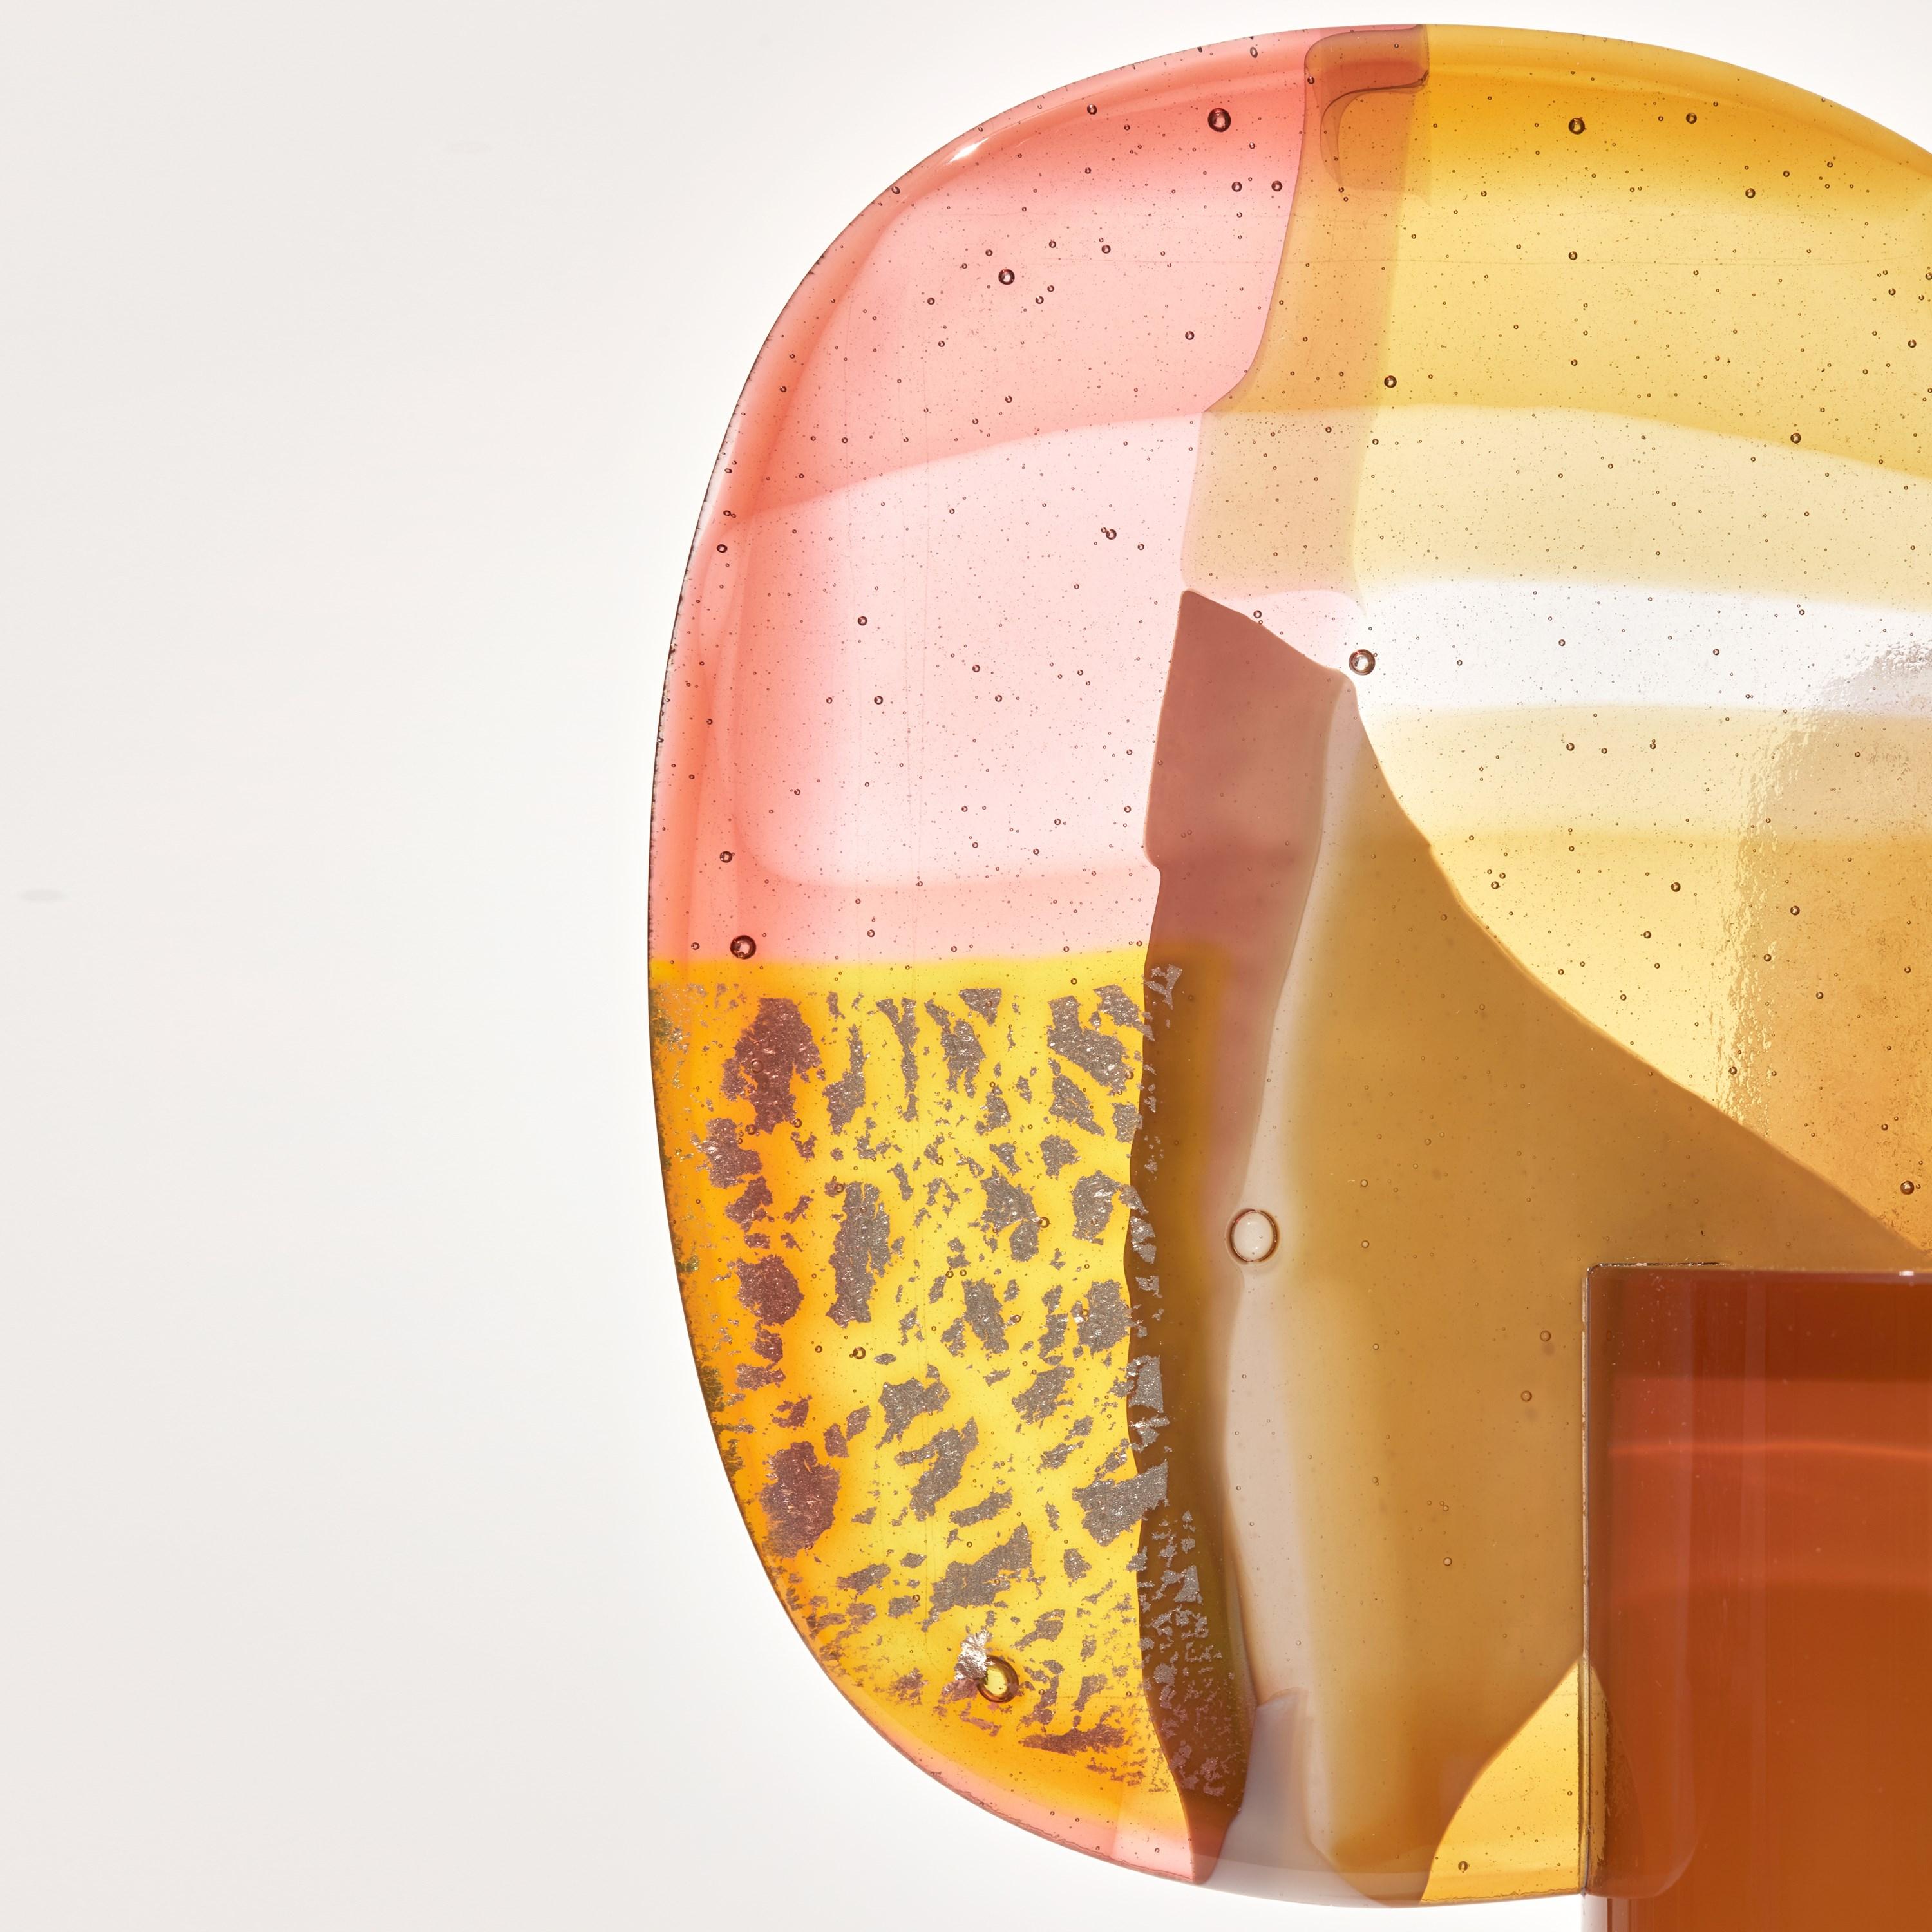 Hand-Crafted Paradise 04 in Amber, an orange, gold & pink glass sculpture by Amy Cushing